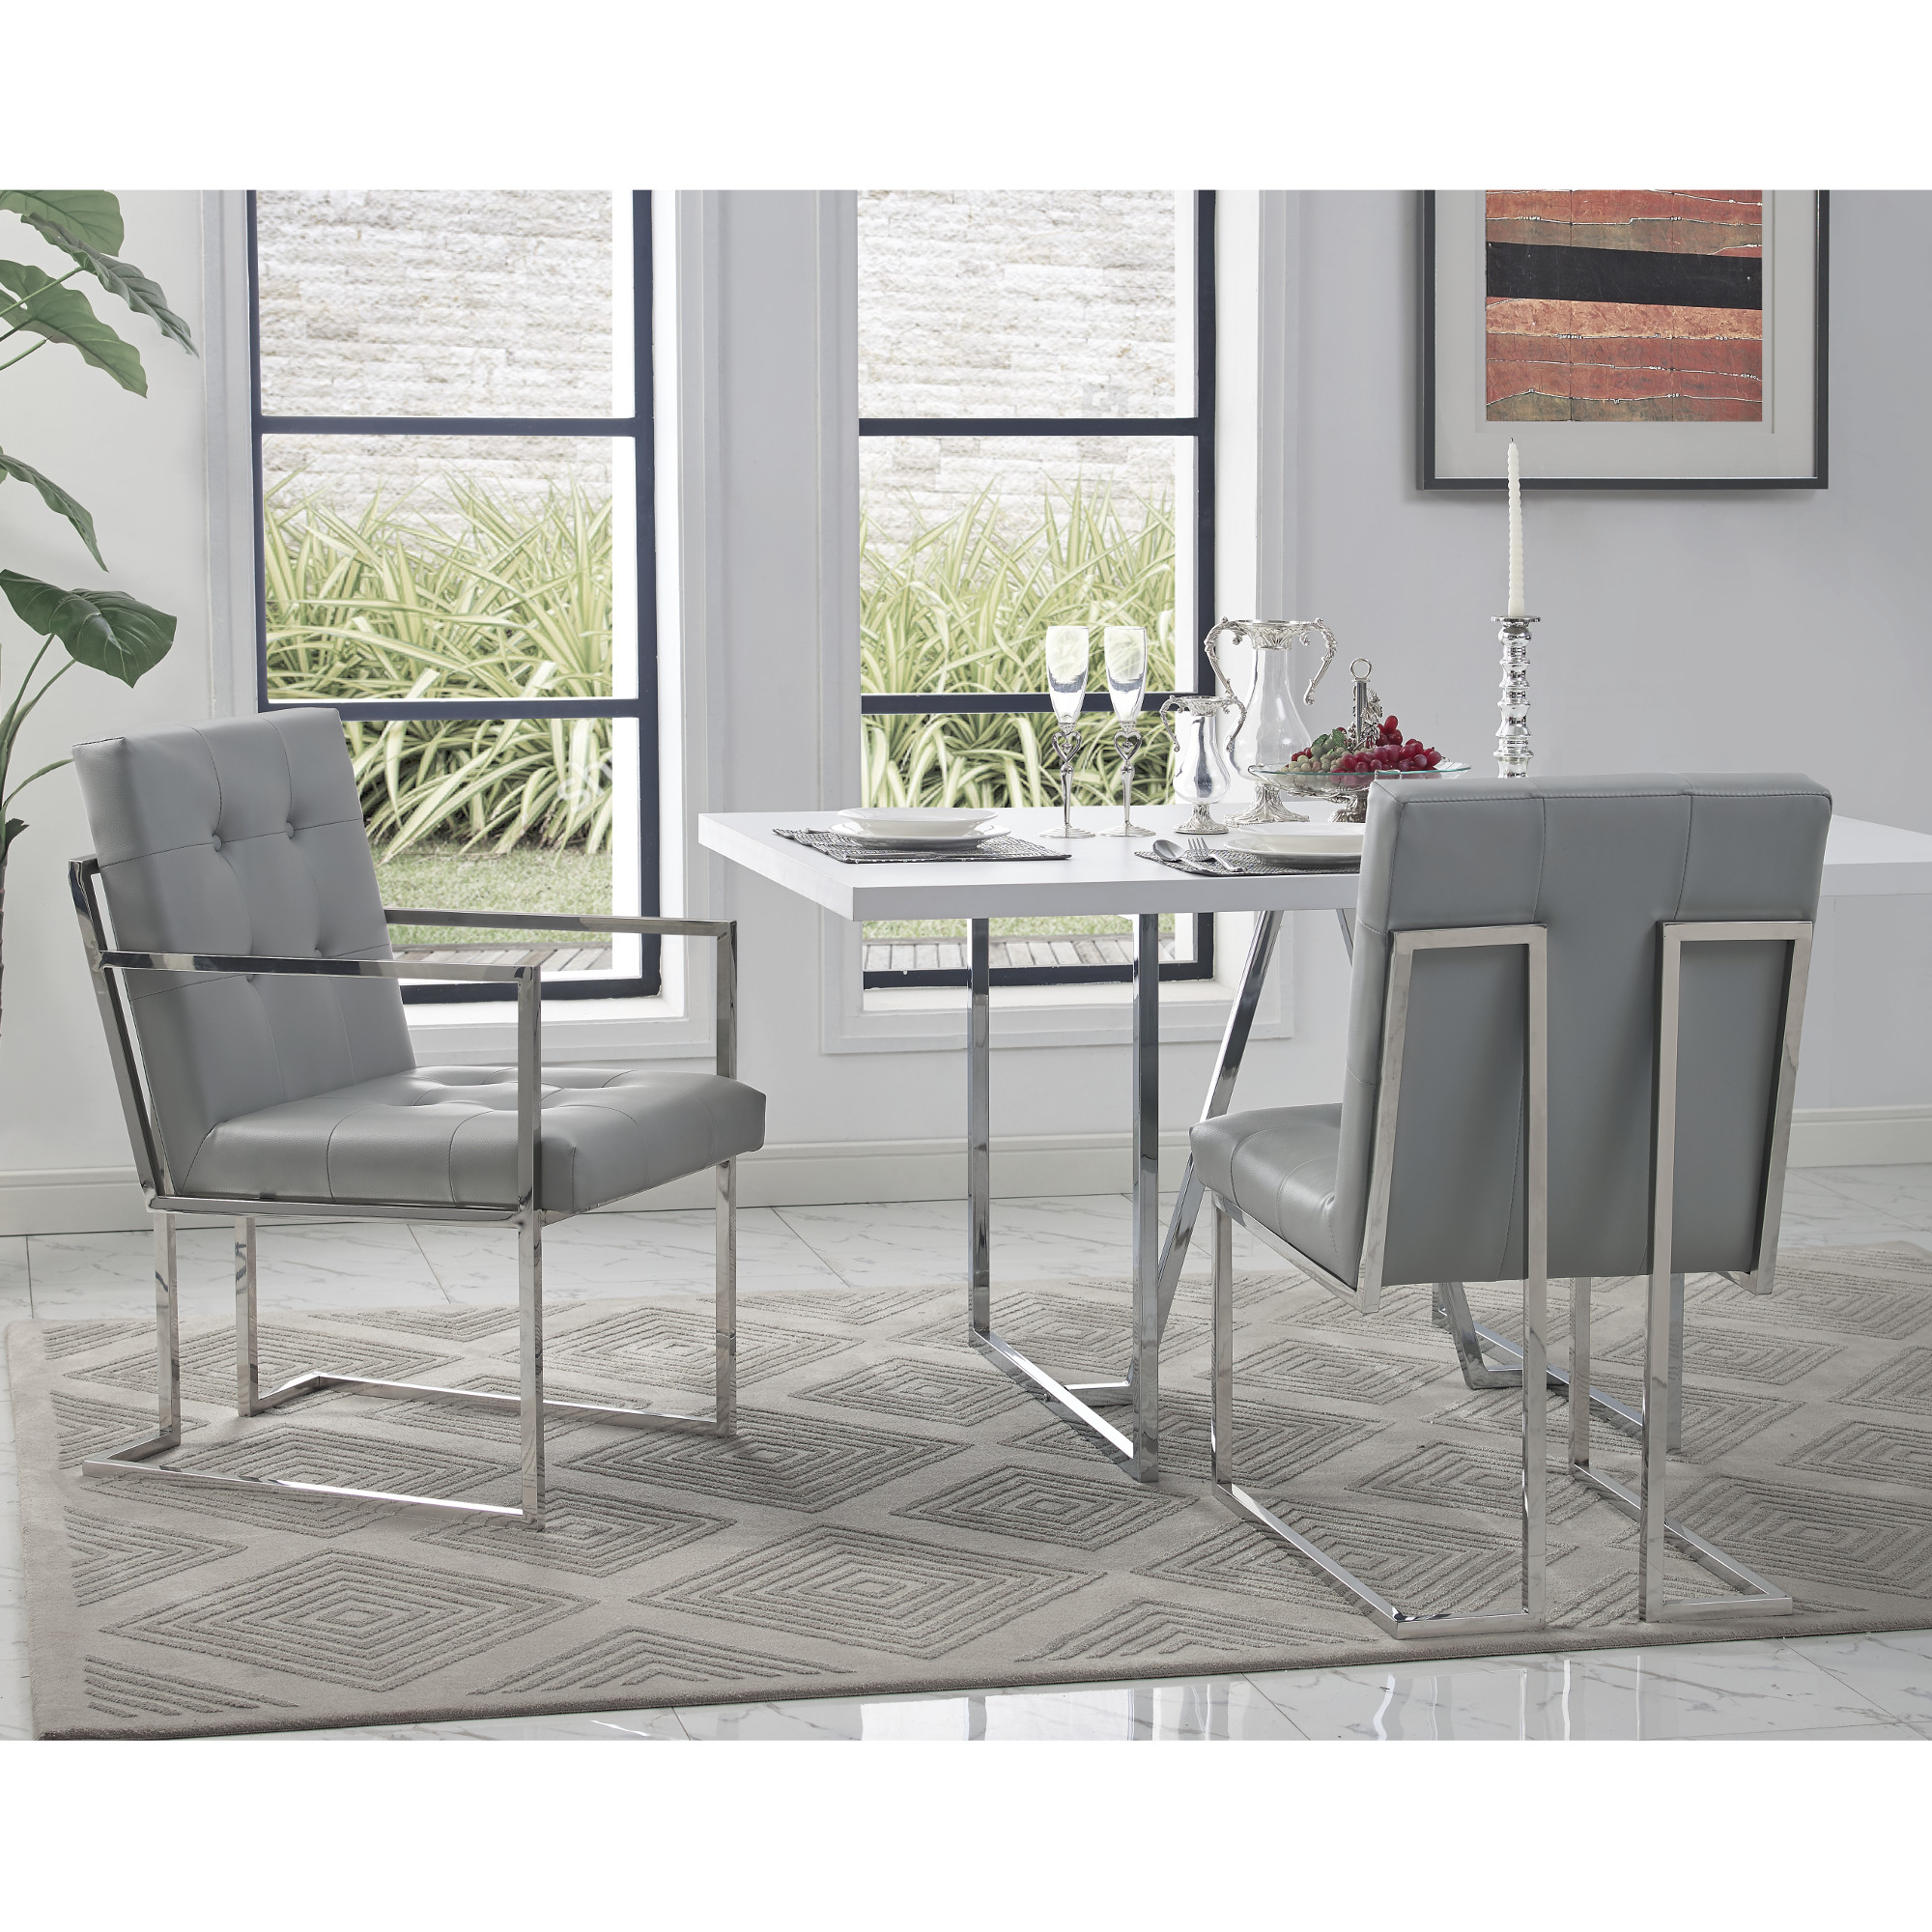 Cecille PU Leather Or Velvet Dining Chair-Set Of 2-Chrome-Gold Frame-Square Arm-Button Tufted-Modern & Functional By Inspired Home - Grey Ve